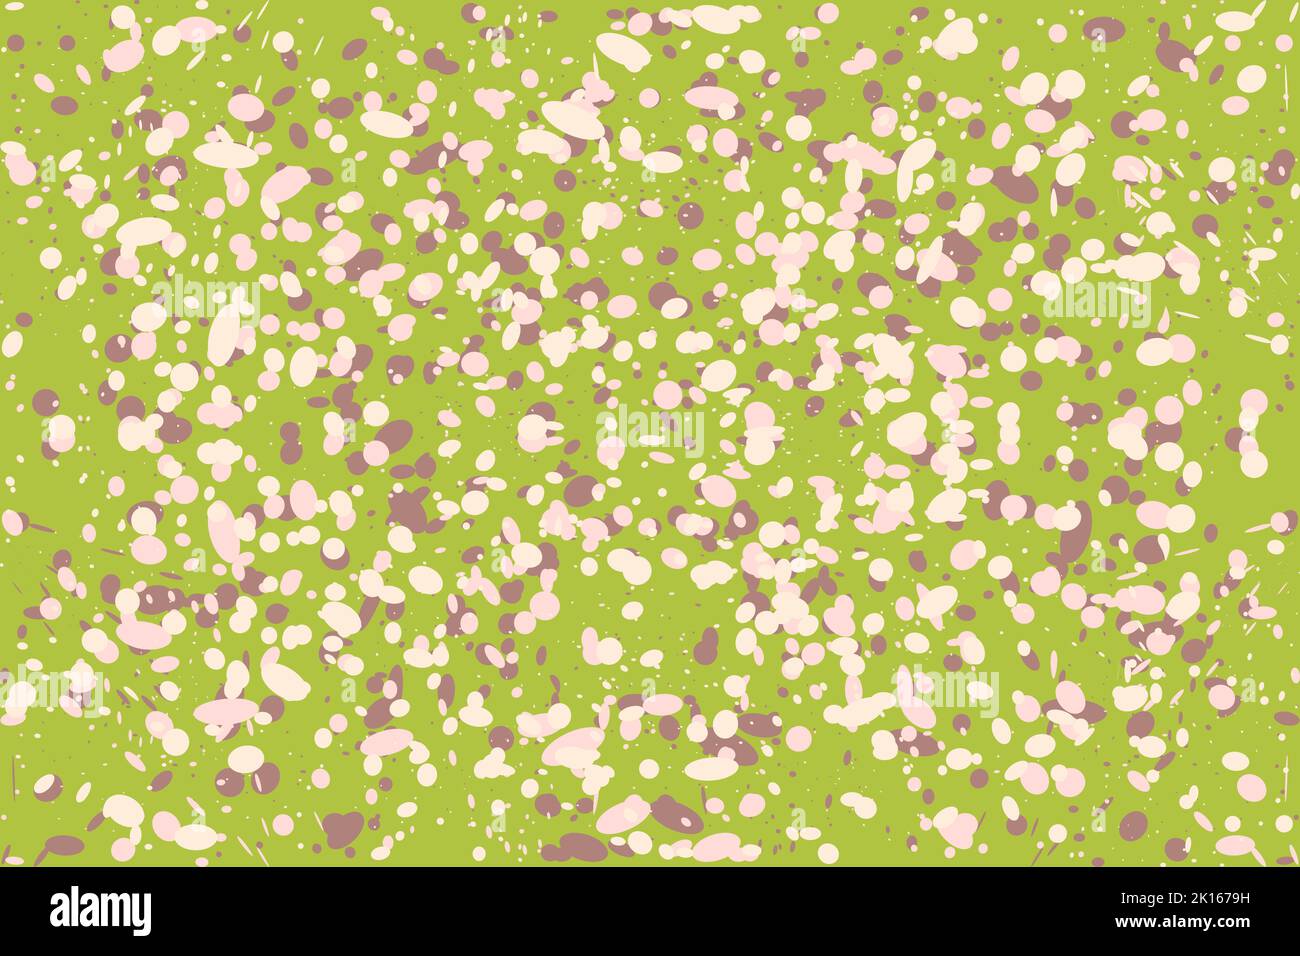 Colorful Abstract background made of paint droplets, blots and splashes. Green, pink and brown colors. Vector illustration Stock Vector